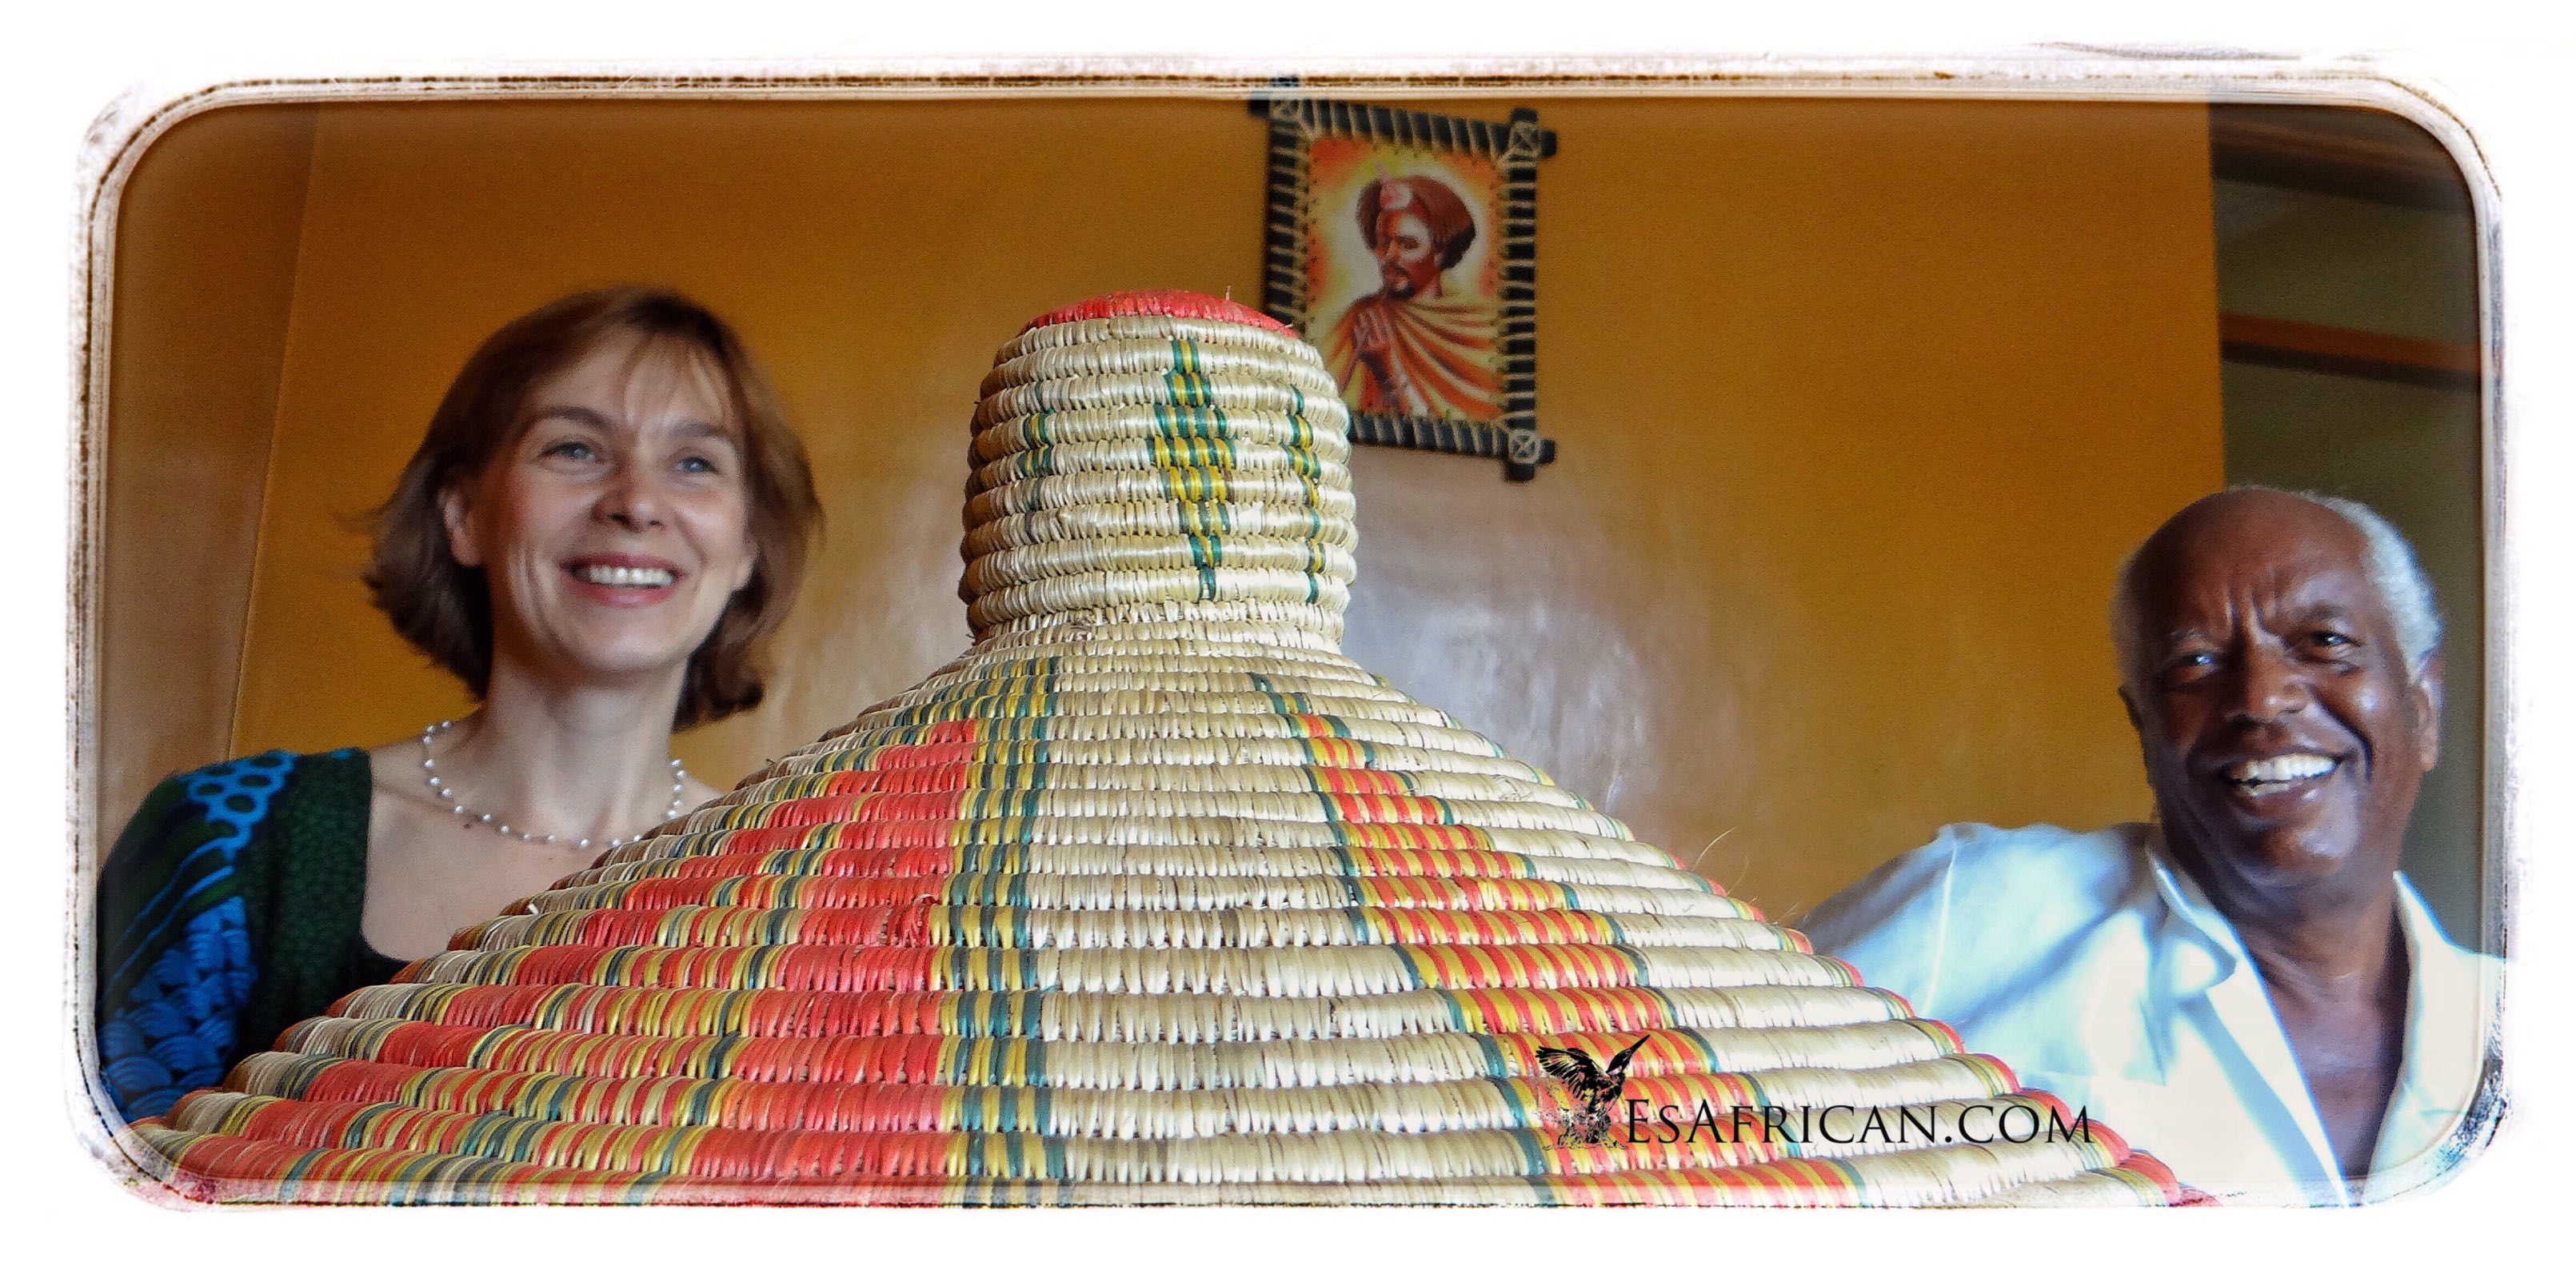 You are assured of a warm welcome at Alem Ethiopian